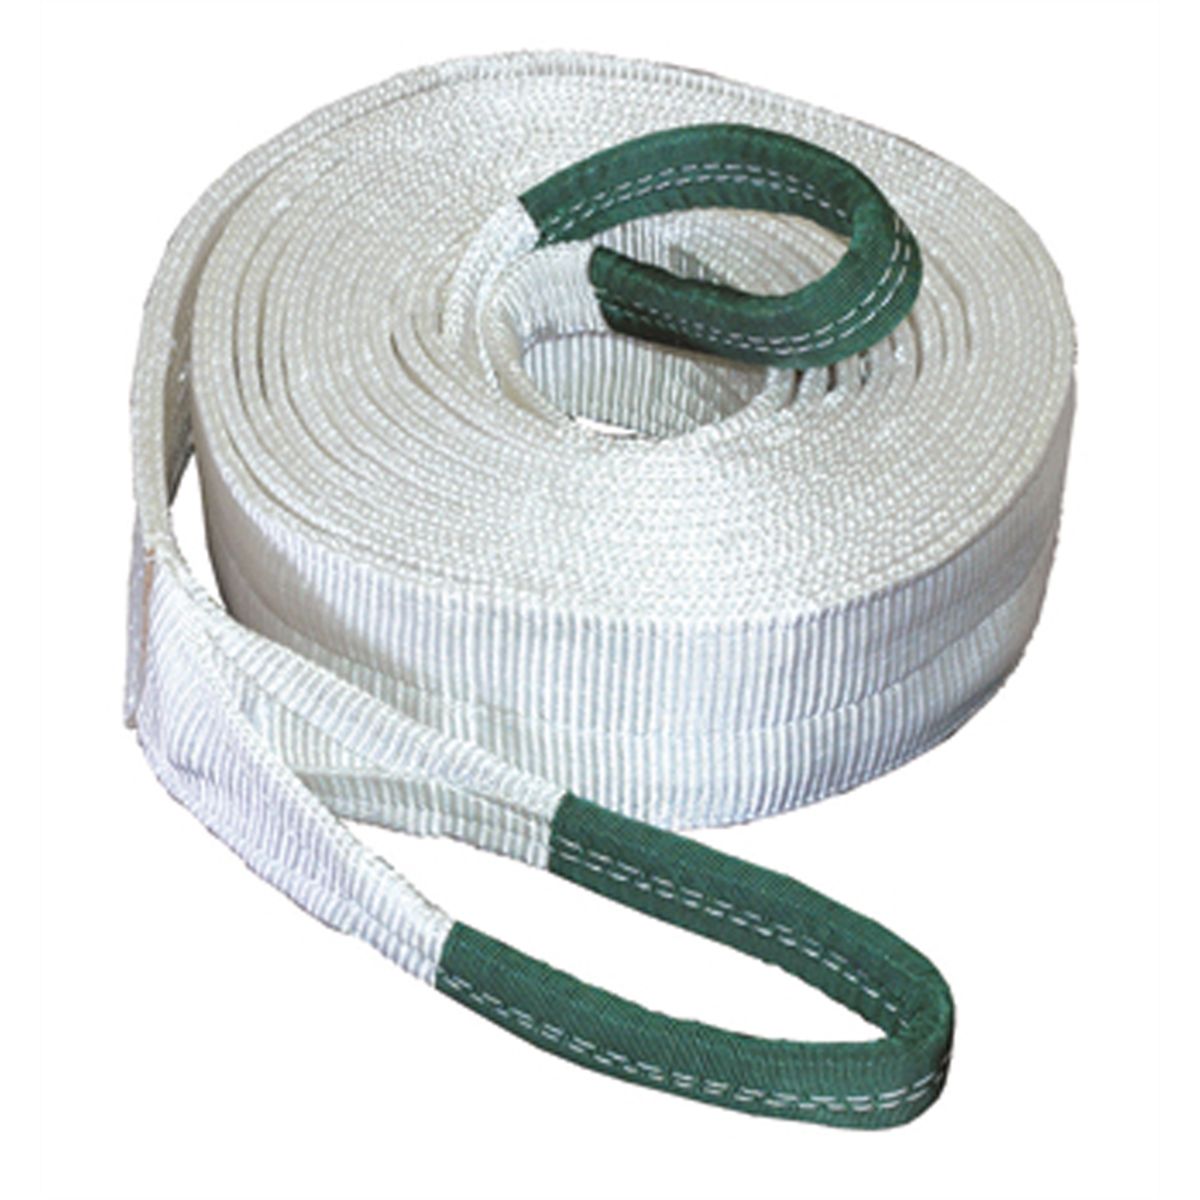 Tow Strap w/ Looped Ends - 4 In x 30 Ft - 40,000 Lb Capacity